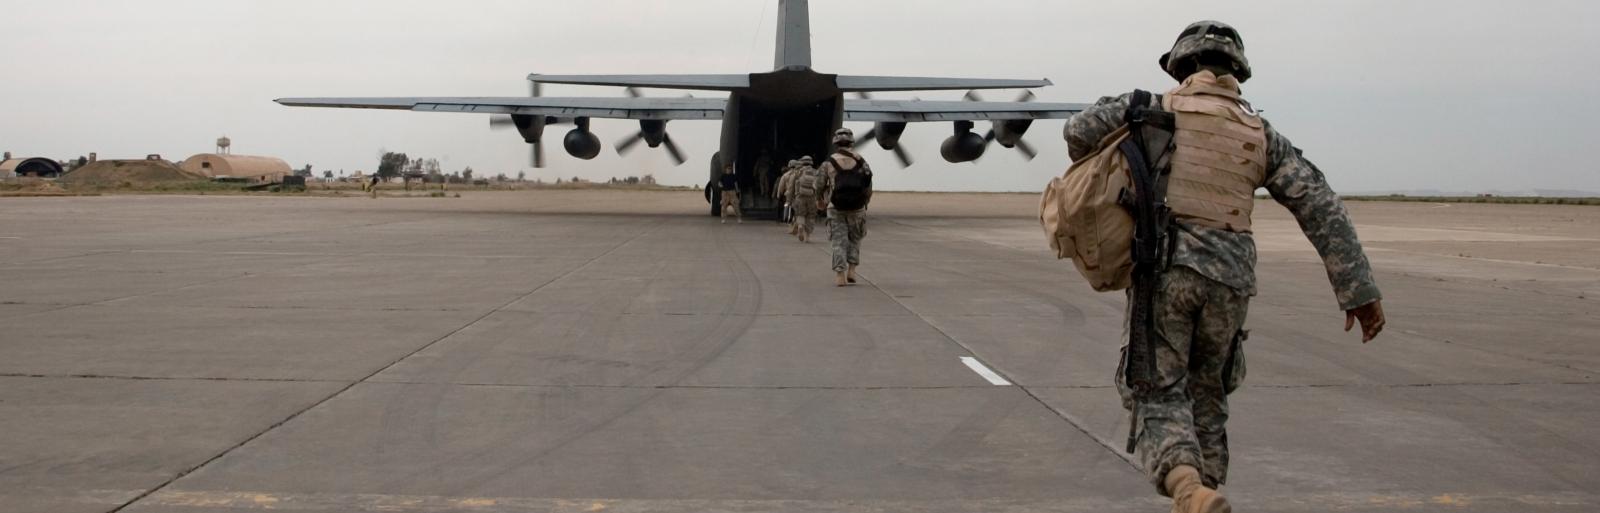 soldiers getting on a plane on the runway